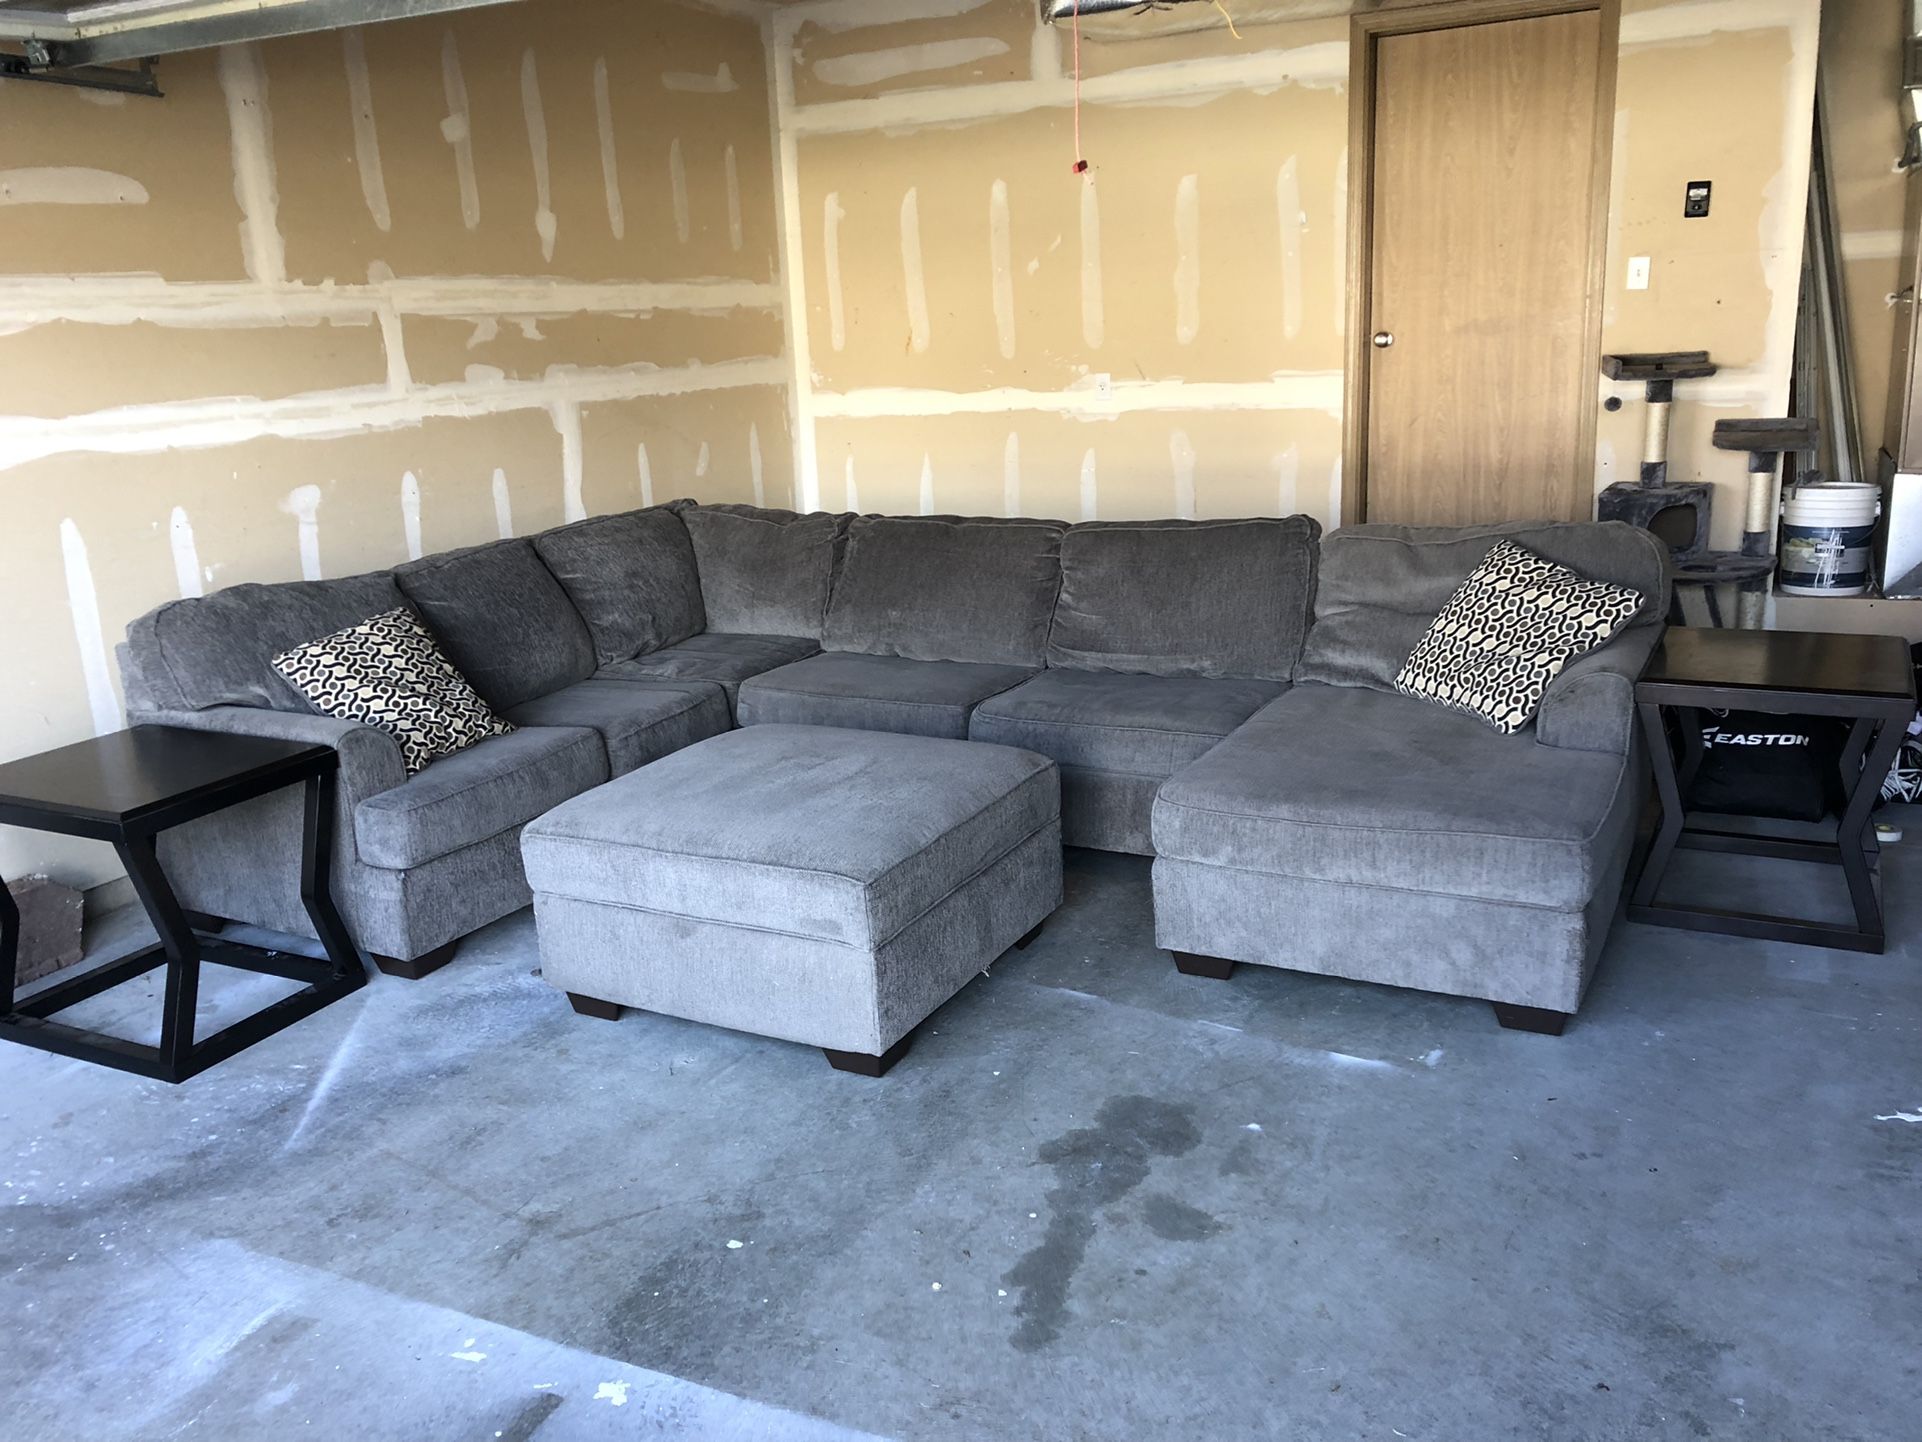 Loric 3-Piece Sectional w/ Chaise, Ottoman, and End Tables